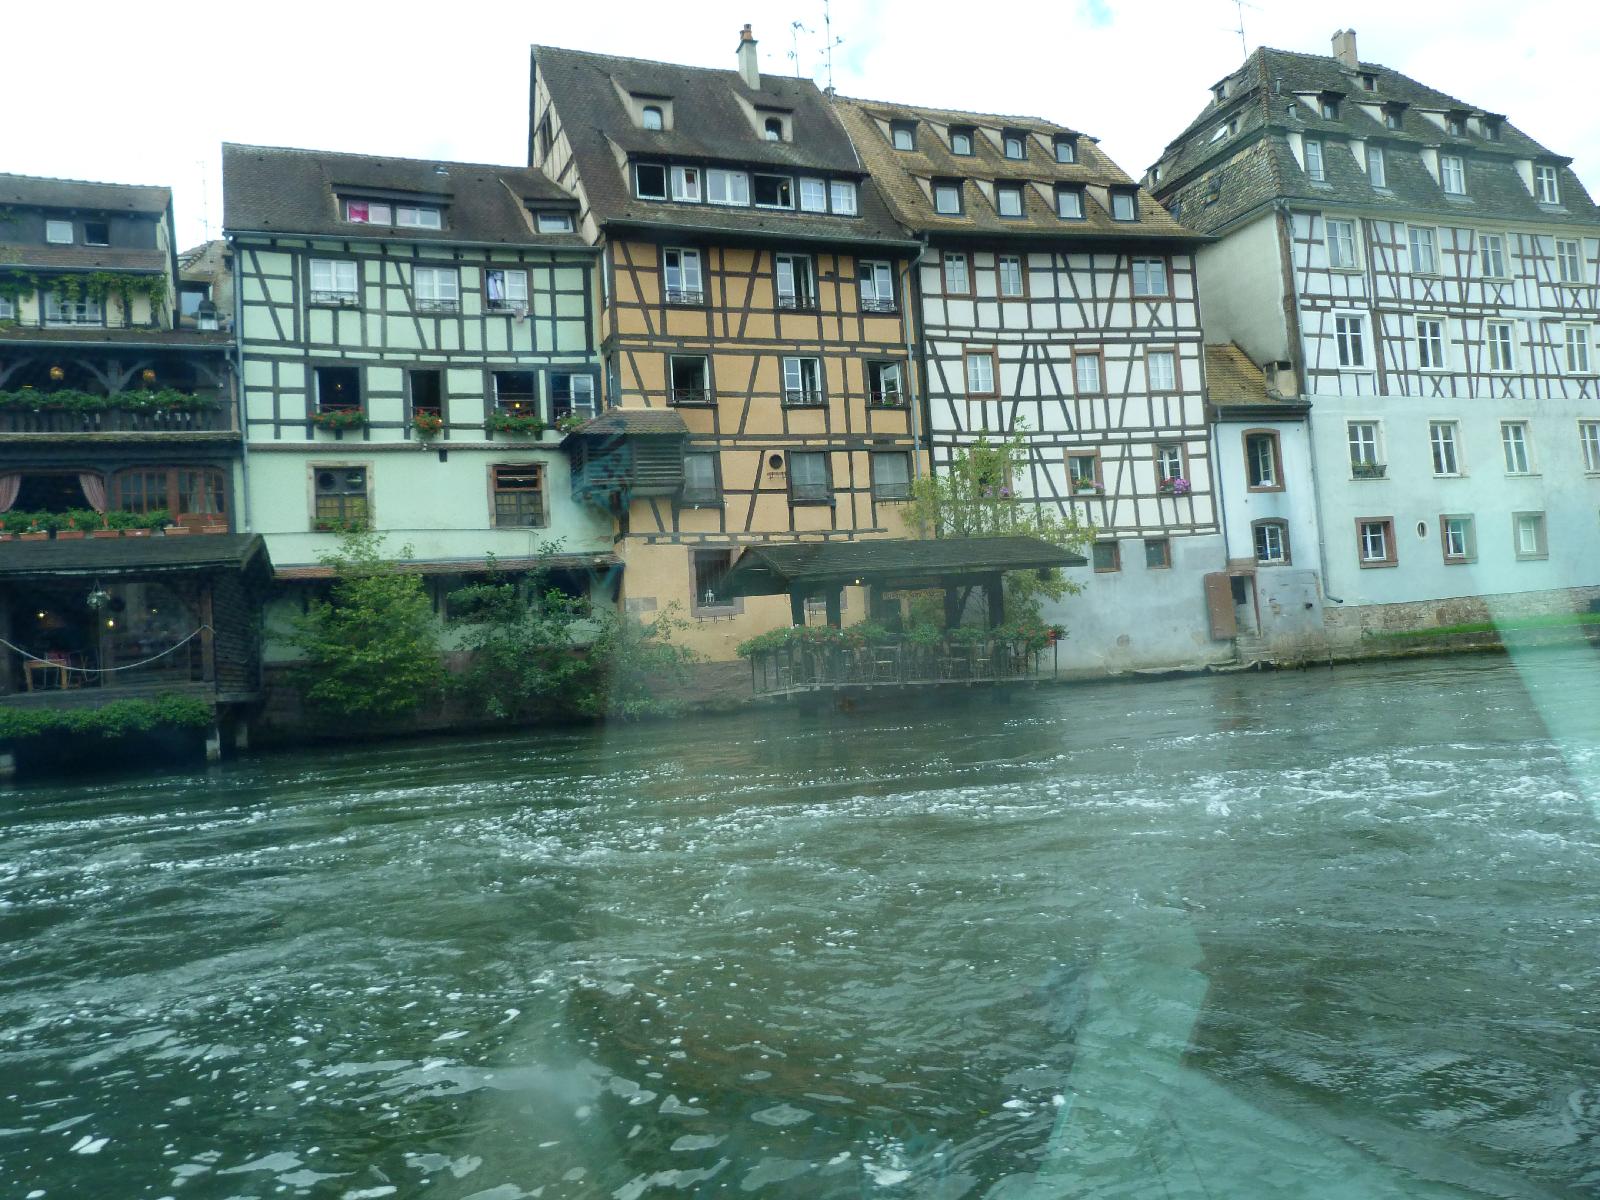 Buildings along the river